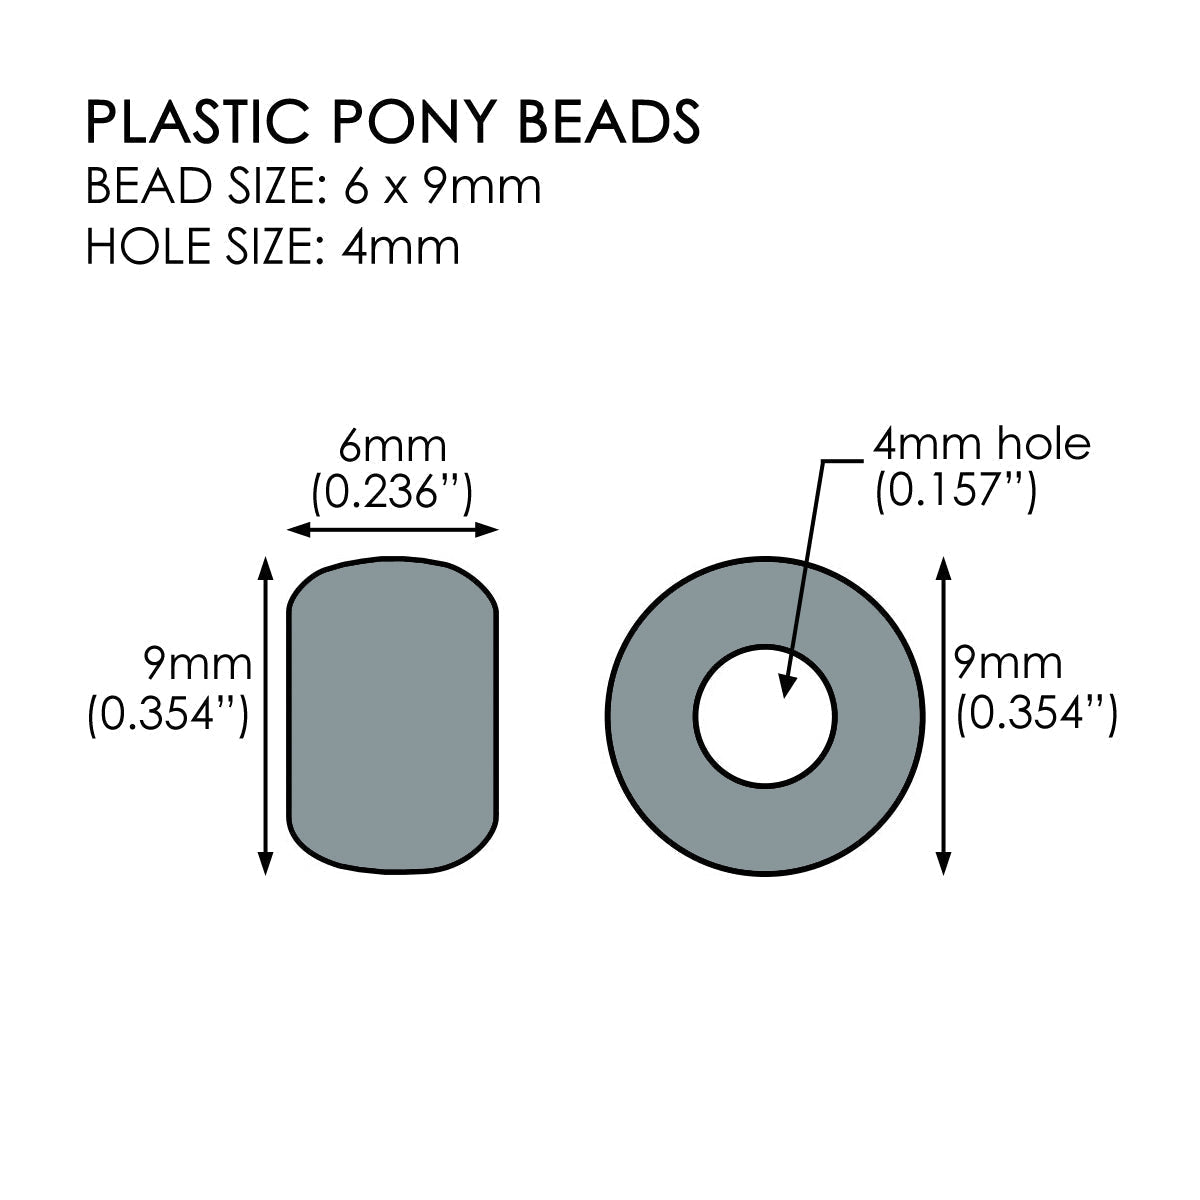 Red Opaque Plastic Craft Pony Beads 6x9mm, Bulk, Made in the USA